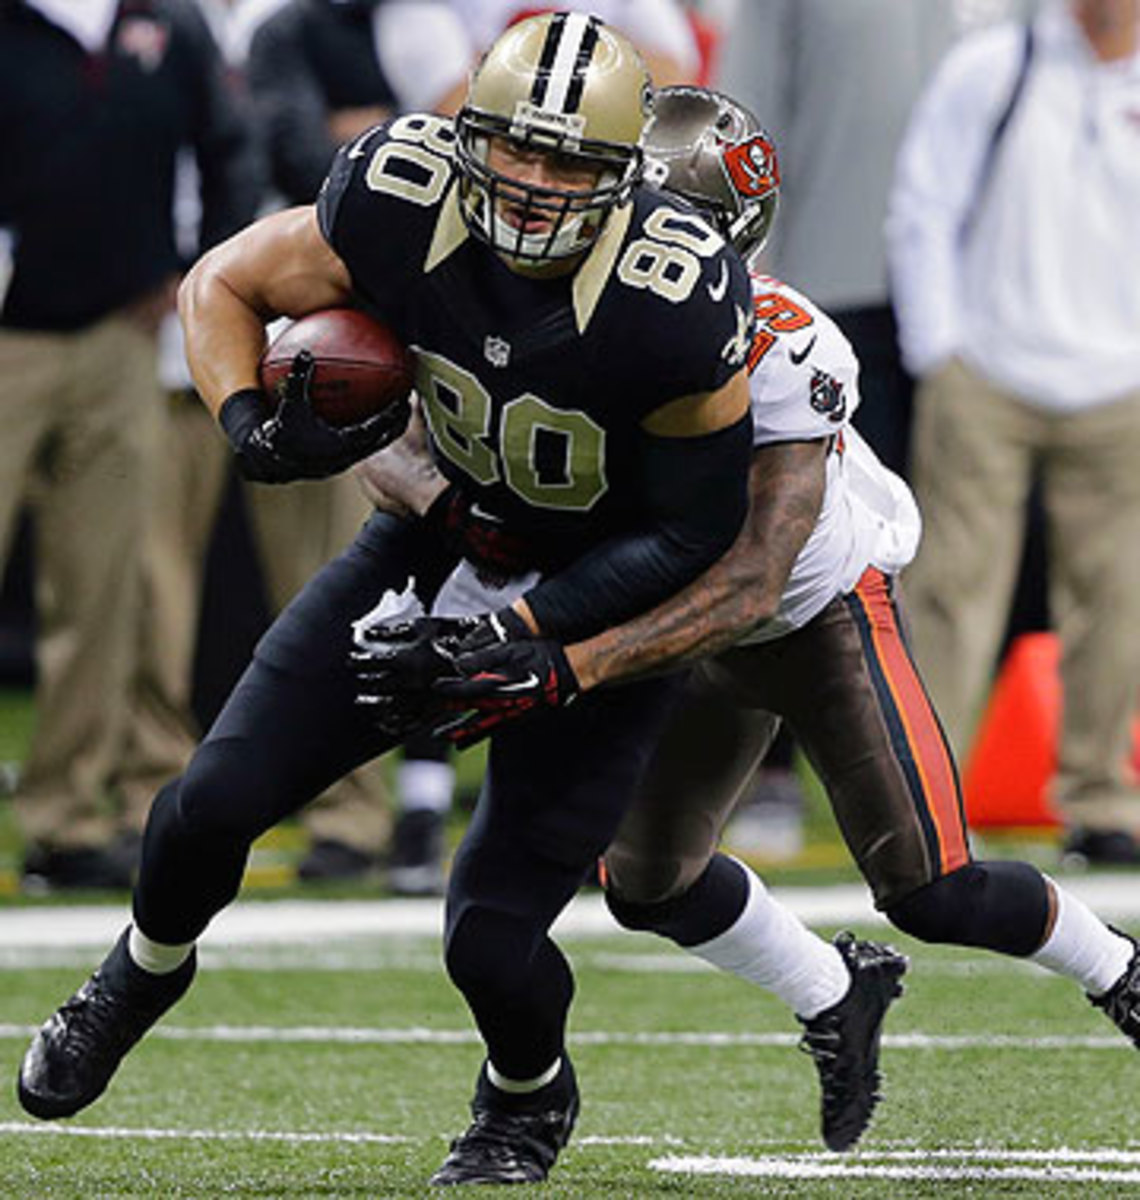 Jimmy Graham recently lost an arbitration decision but still might become the highest paid tight end ever in the NFL, if he and the Saints can agree to a new contract. (Bill Haber/AP)